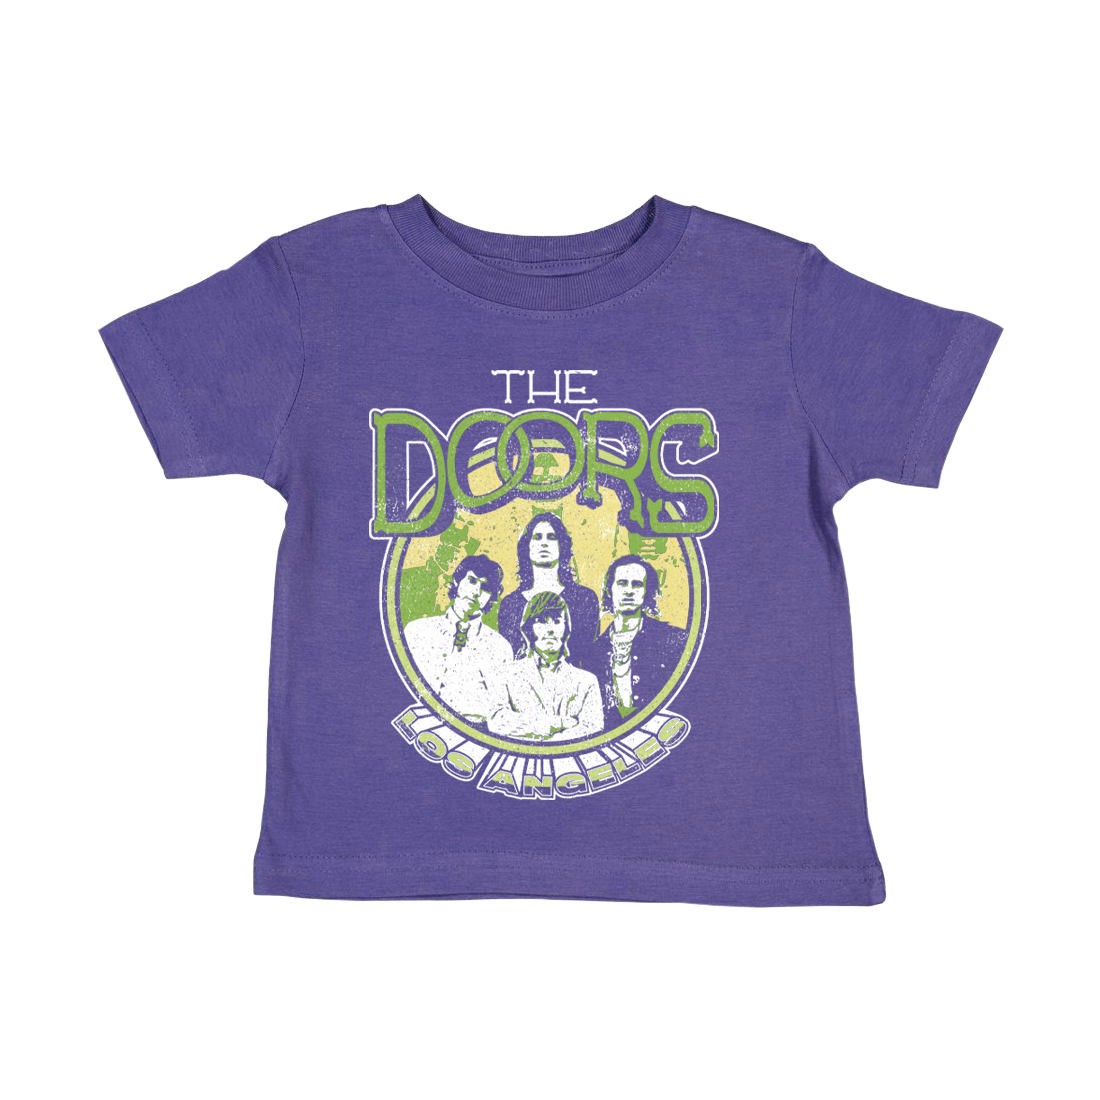 Los Angeles Toddler/Youth T-Shirt - The Doors Official Online Store